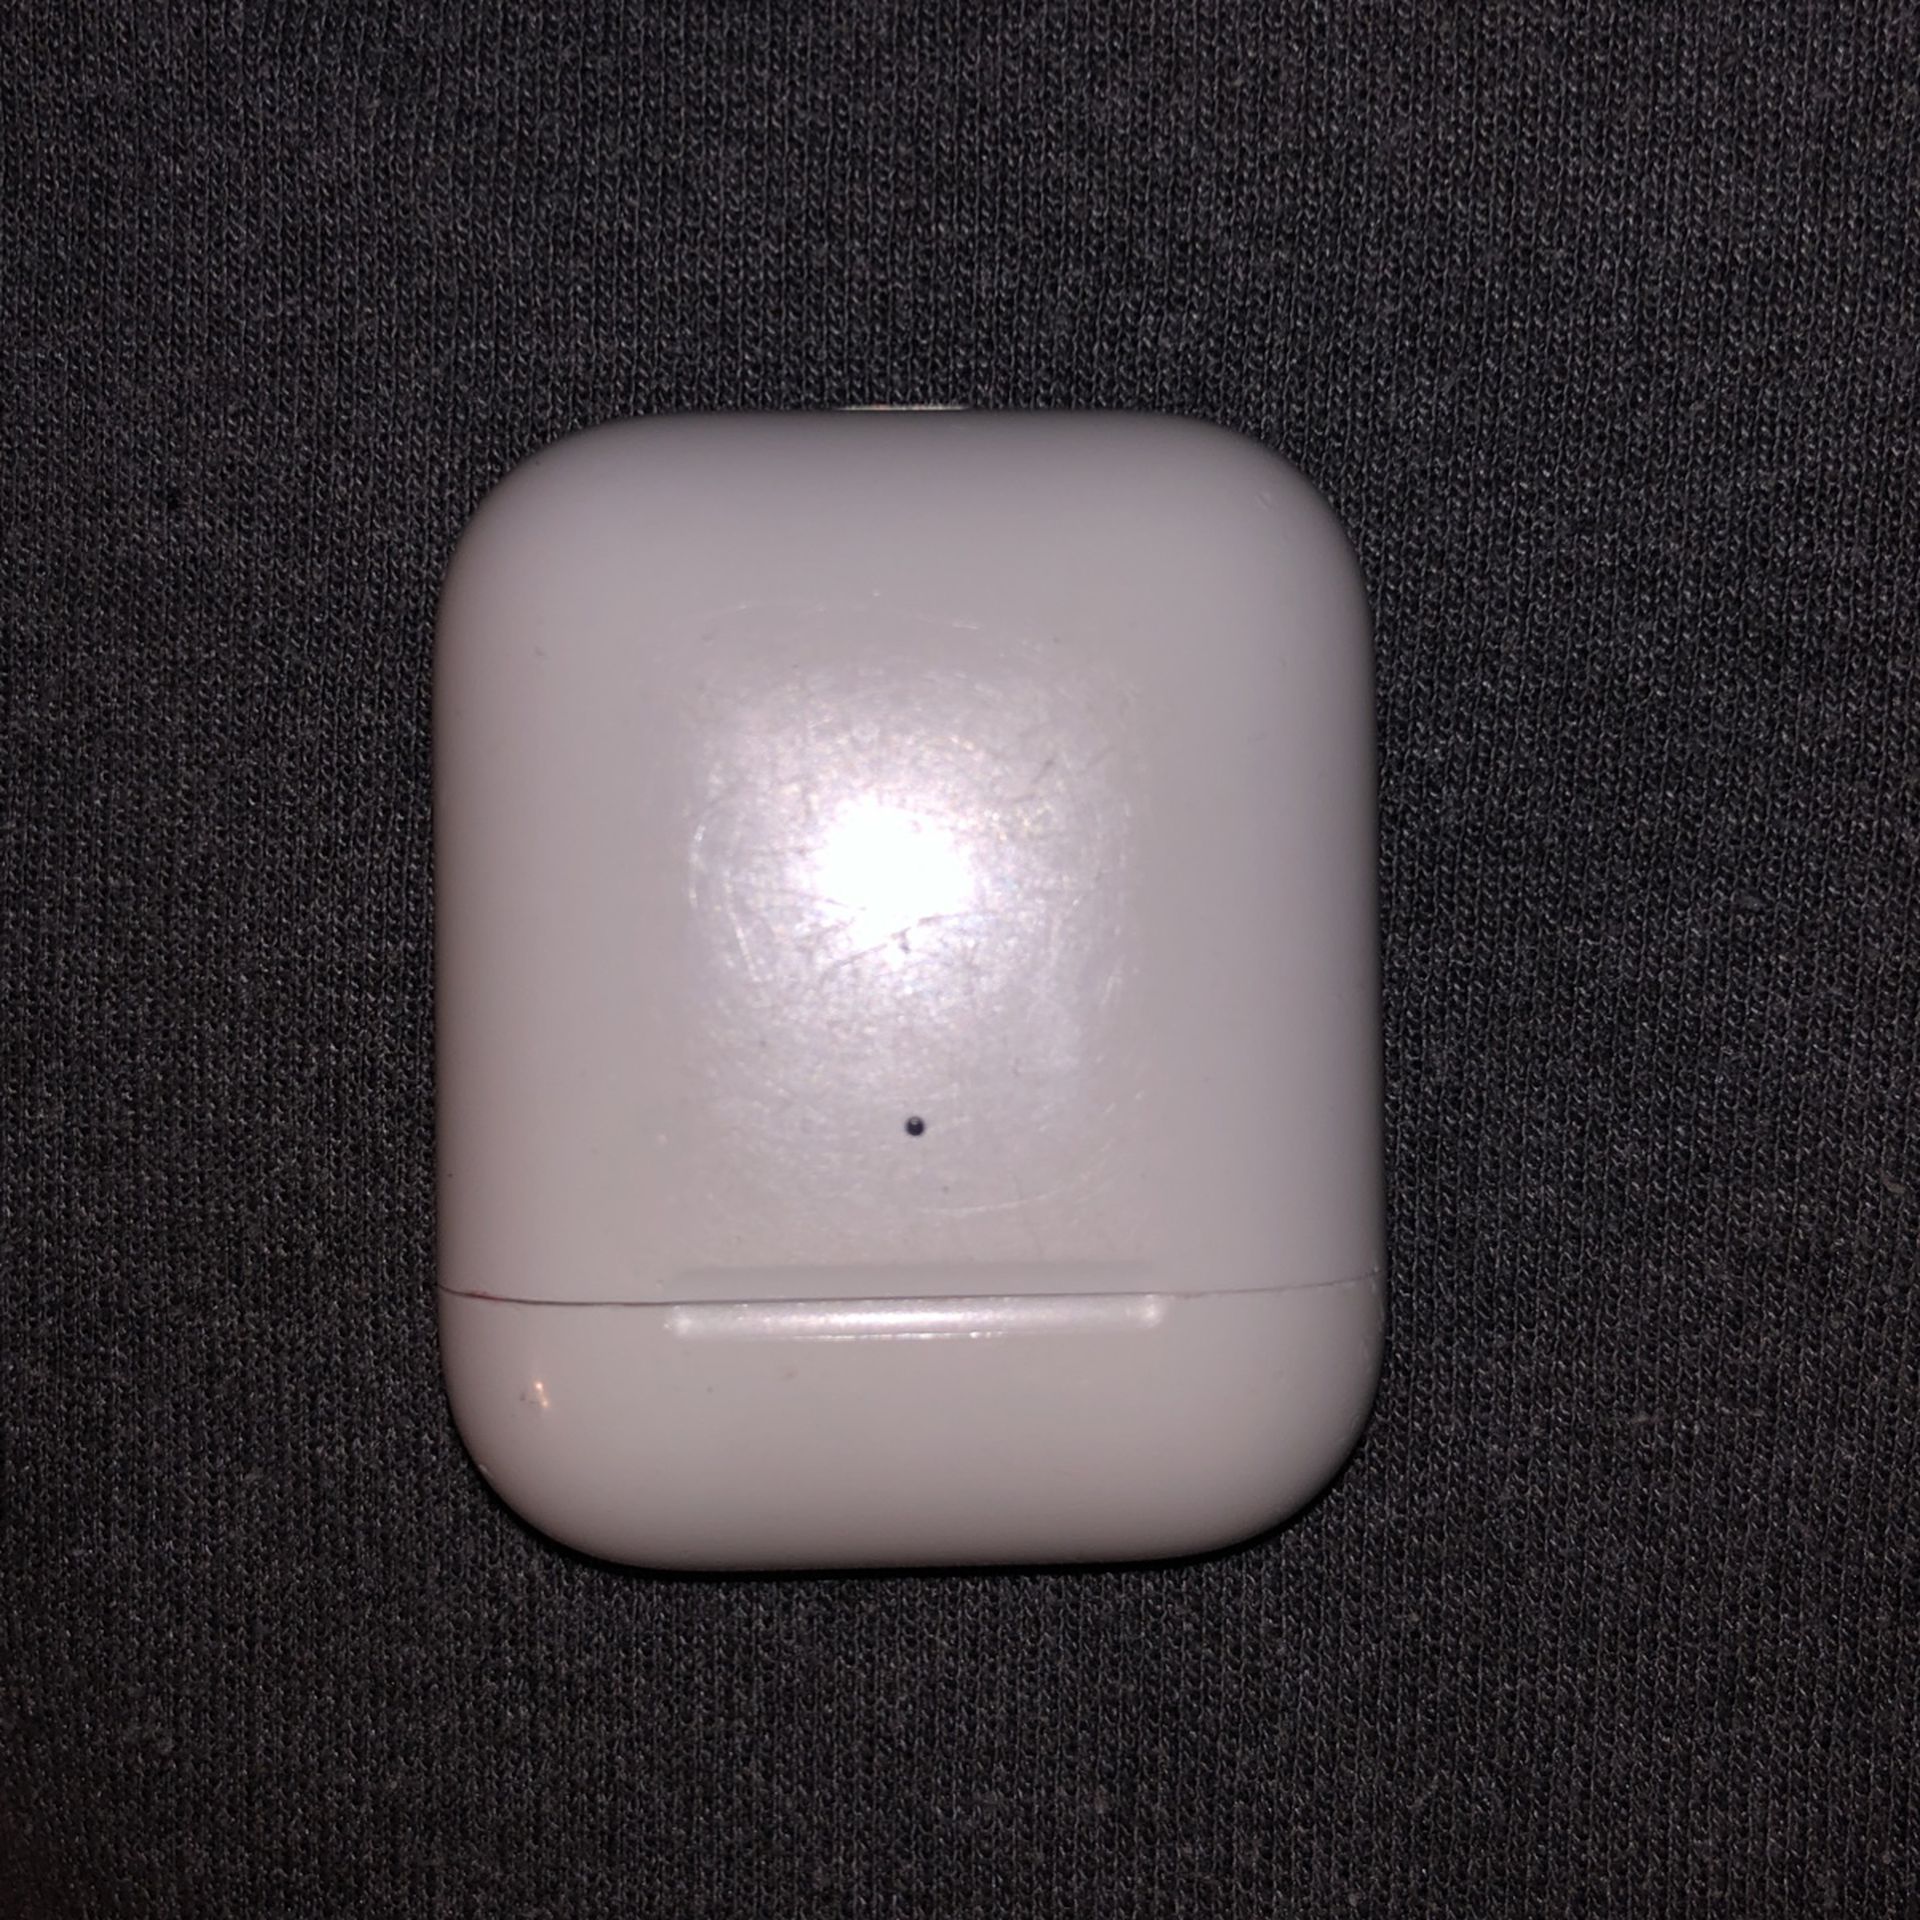 AirPods (used)